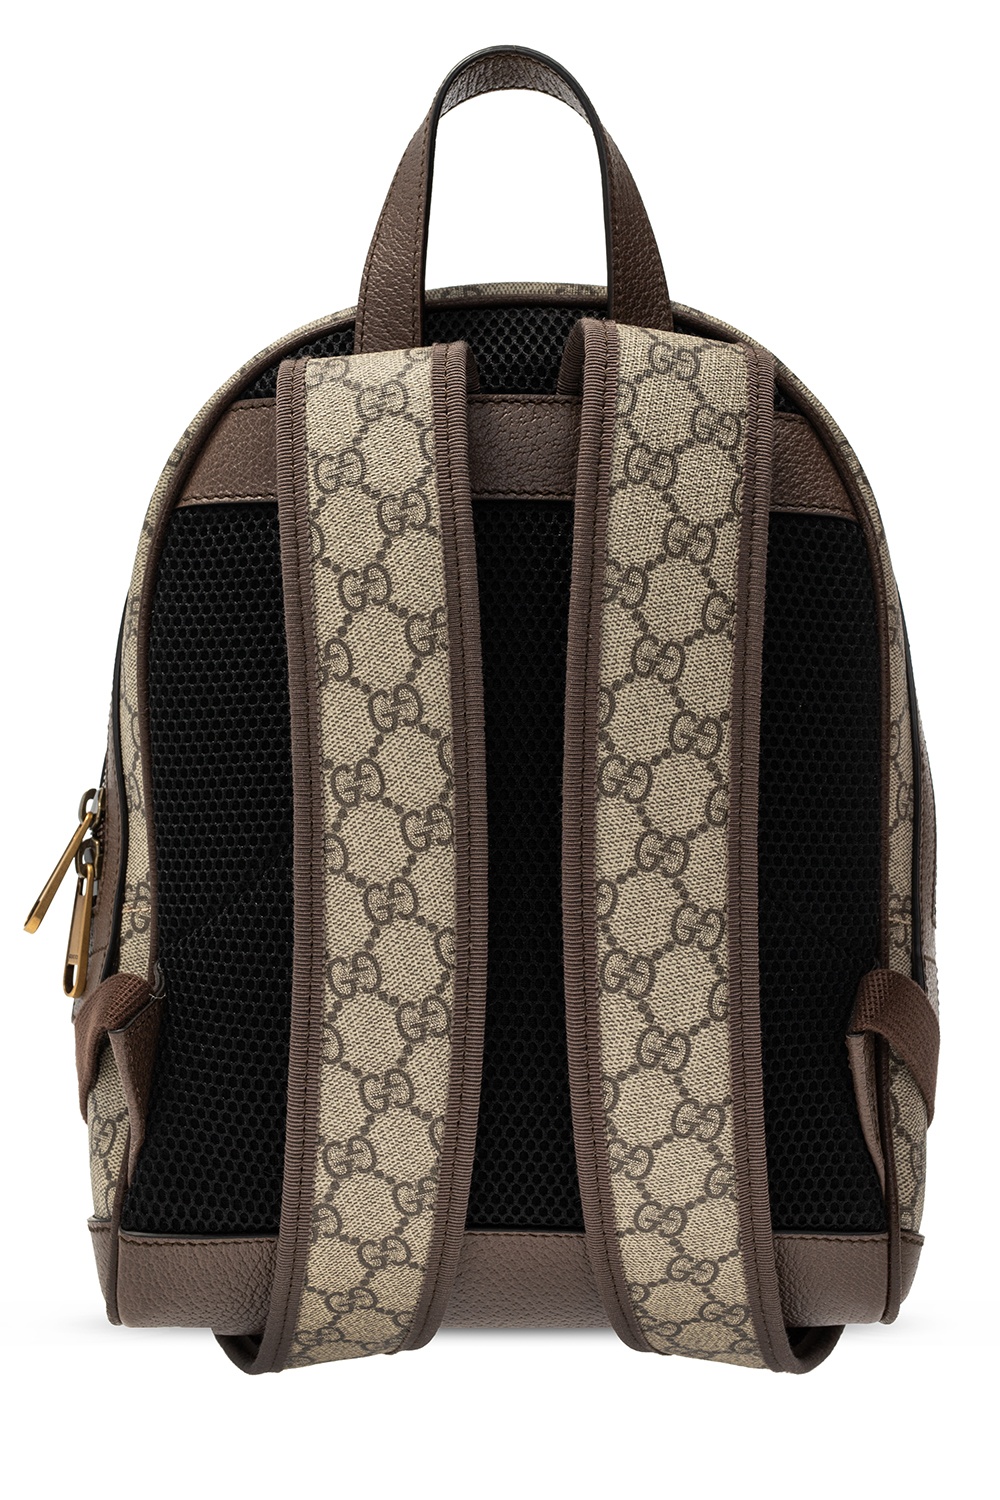 BALO UNISEX GUCCI OPHIDIA GG SMALL BACKPACK 1